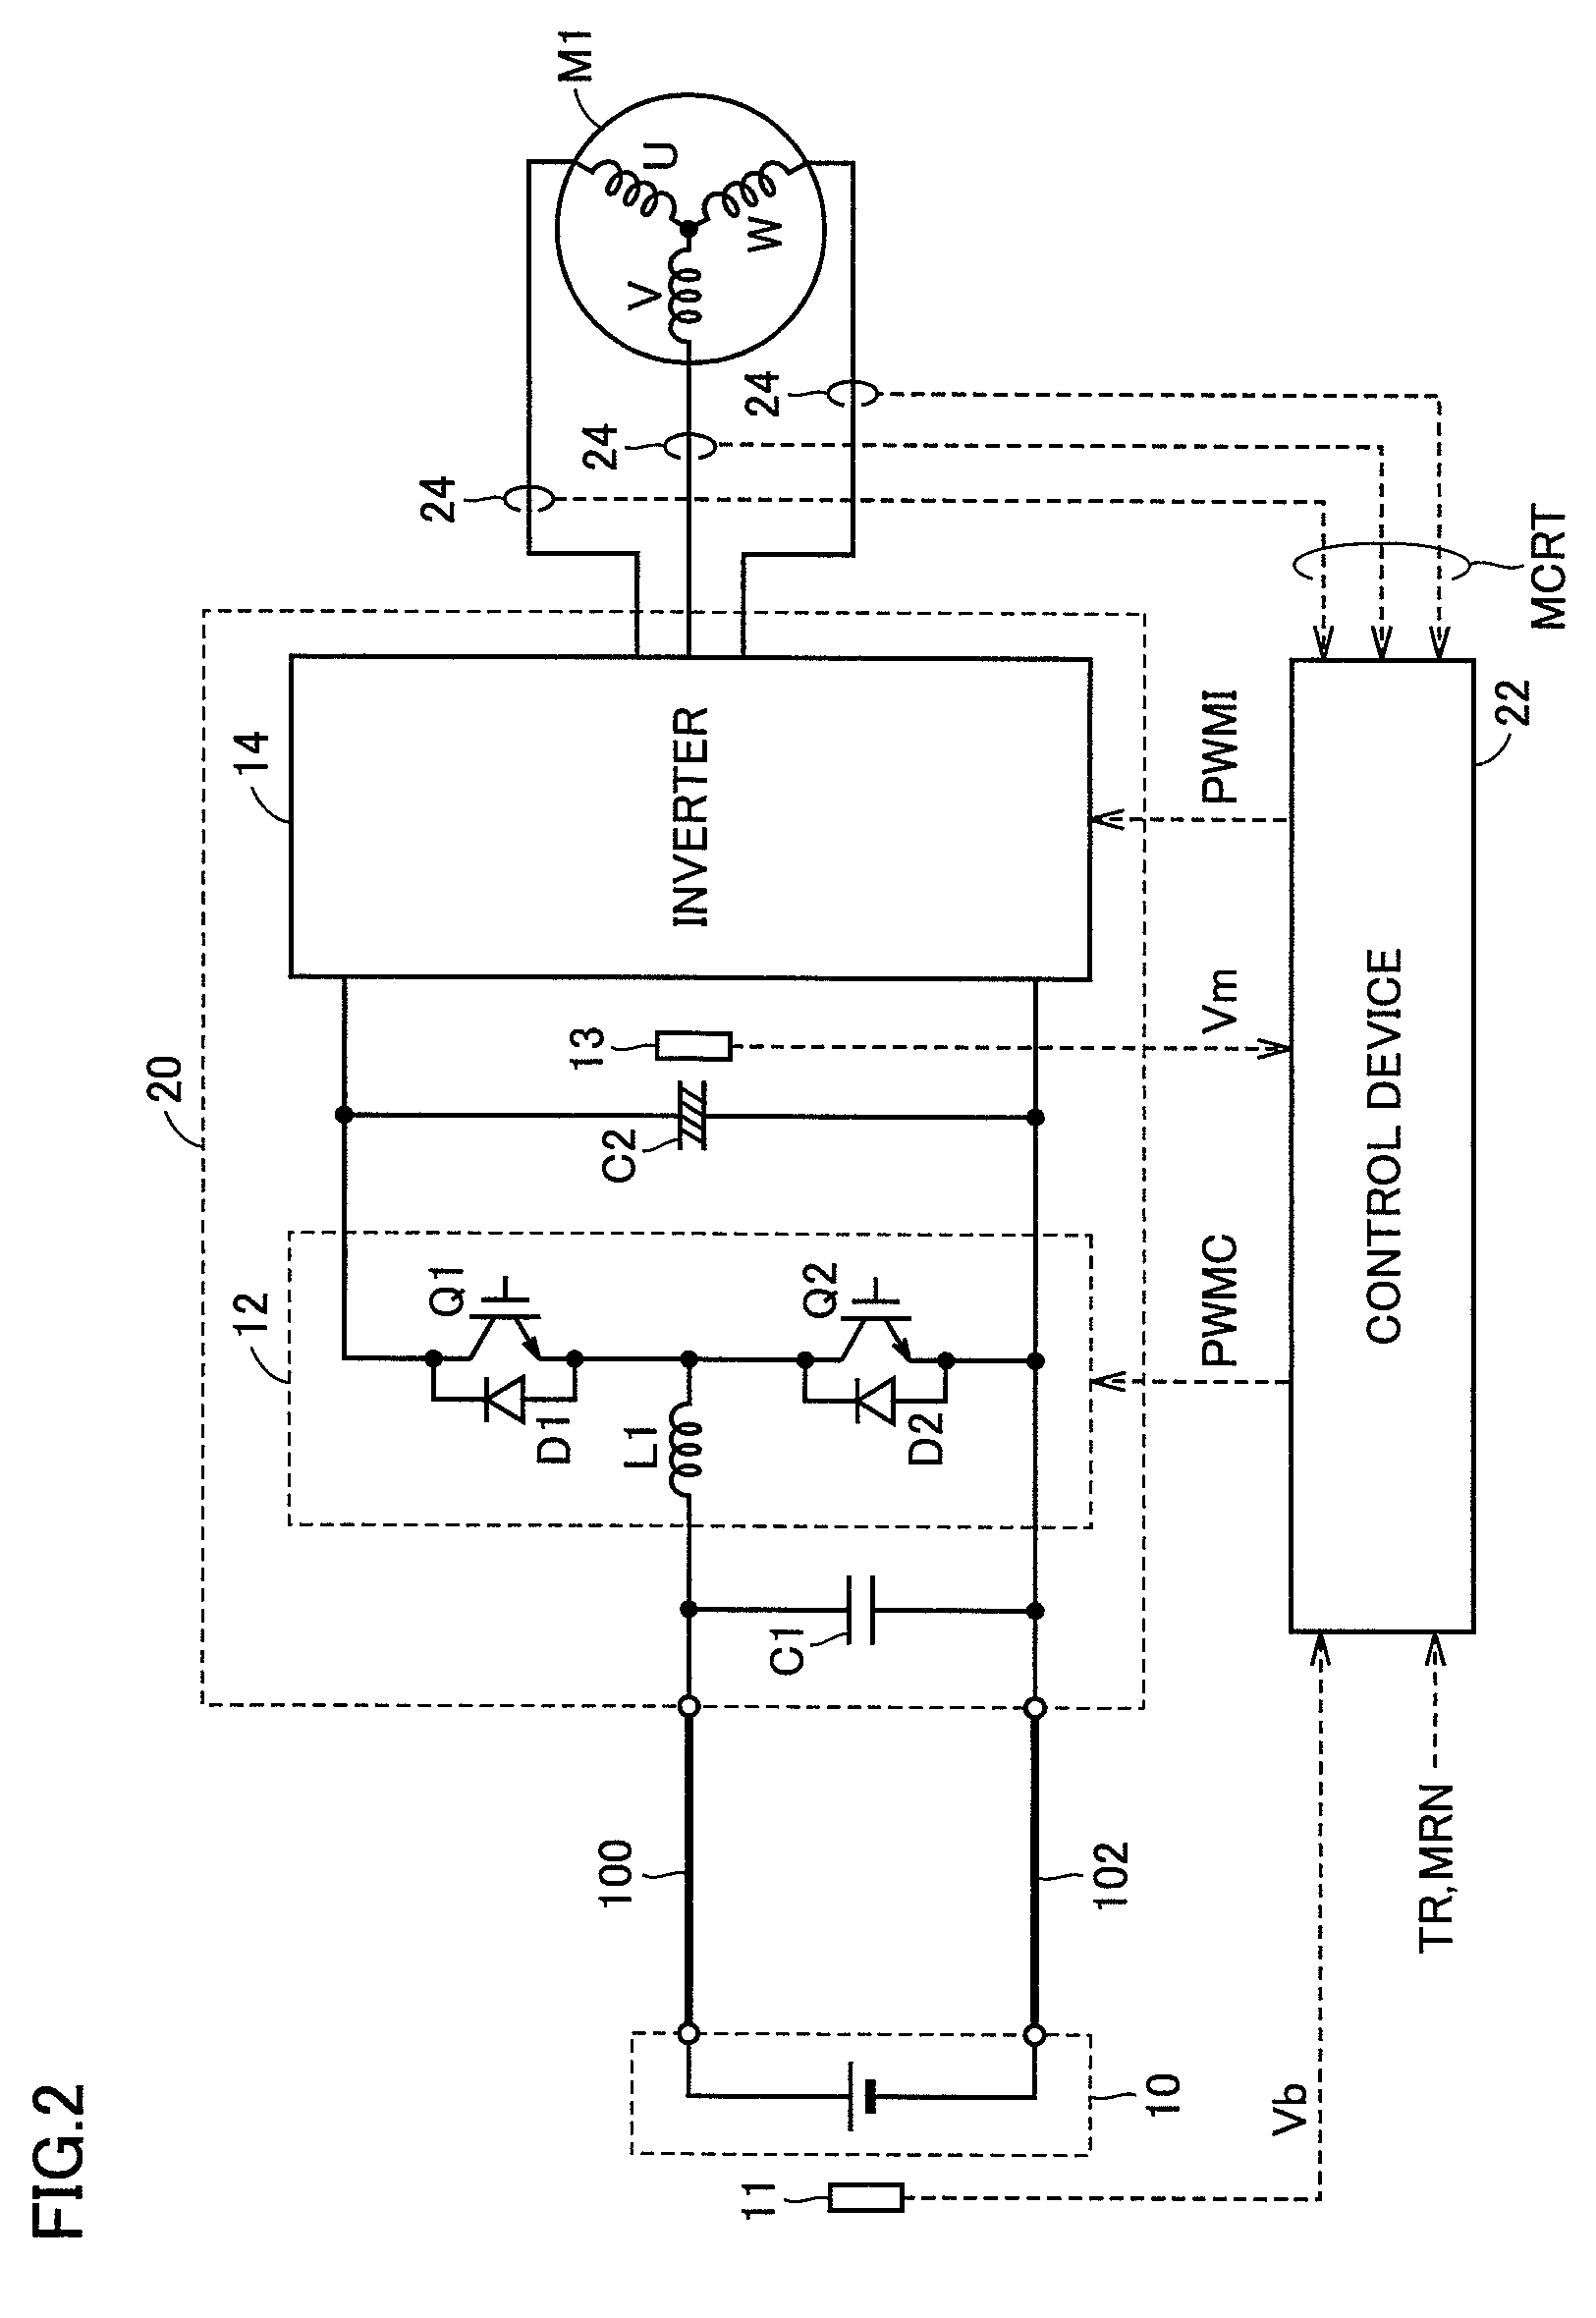 Load driving device including first and second electric power lines between power supply and electric power conversion device